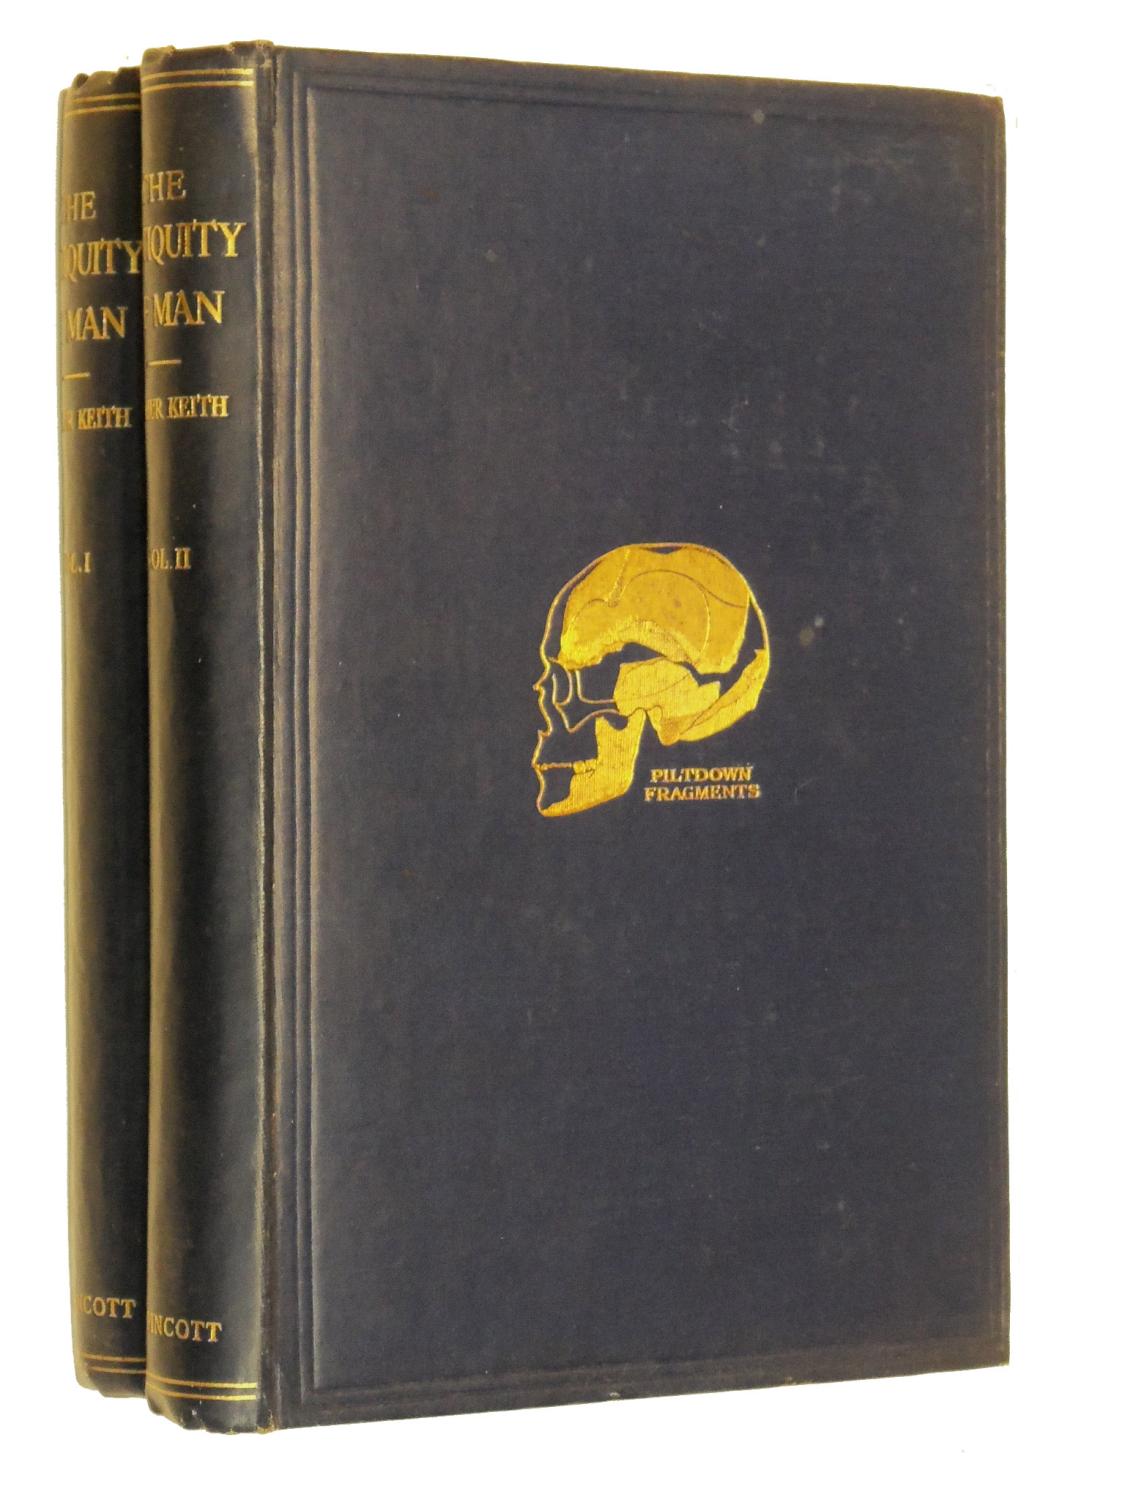 The Antiquity of Man by Keith, Sir Arthur: Near Fine Hardcover (1928 ...